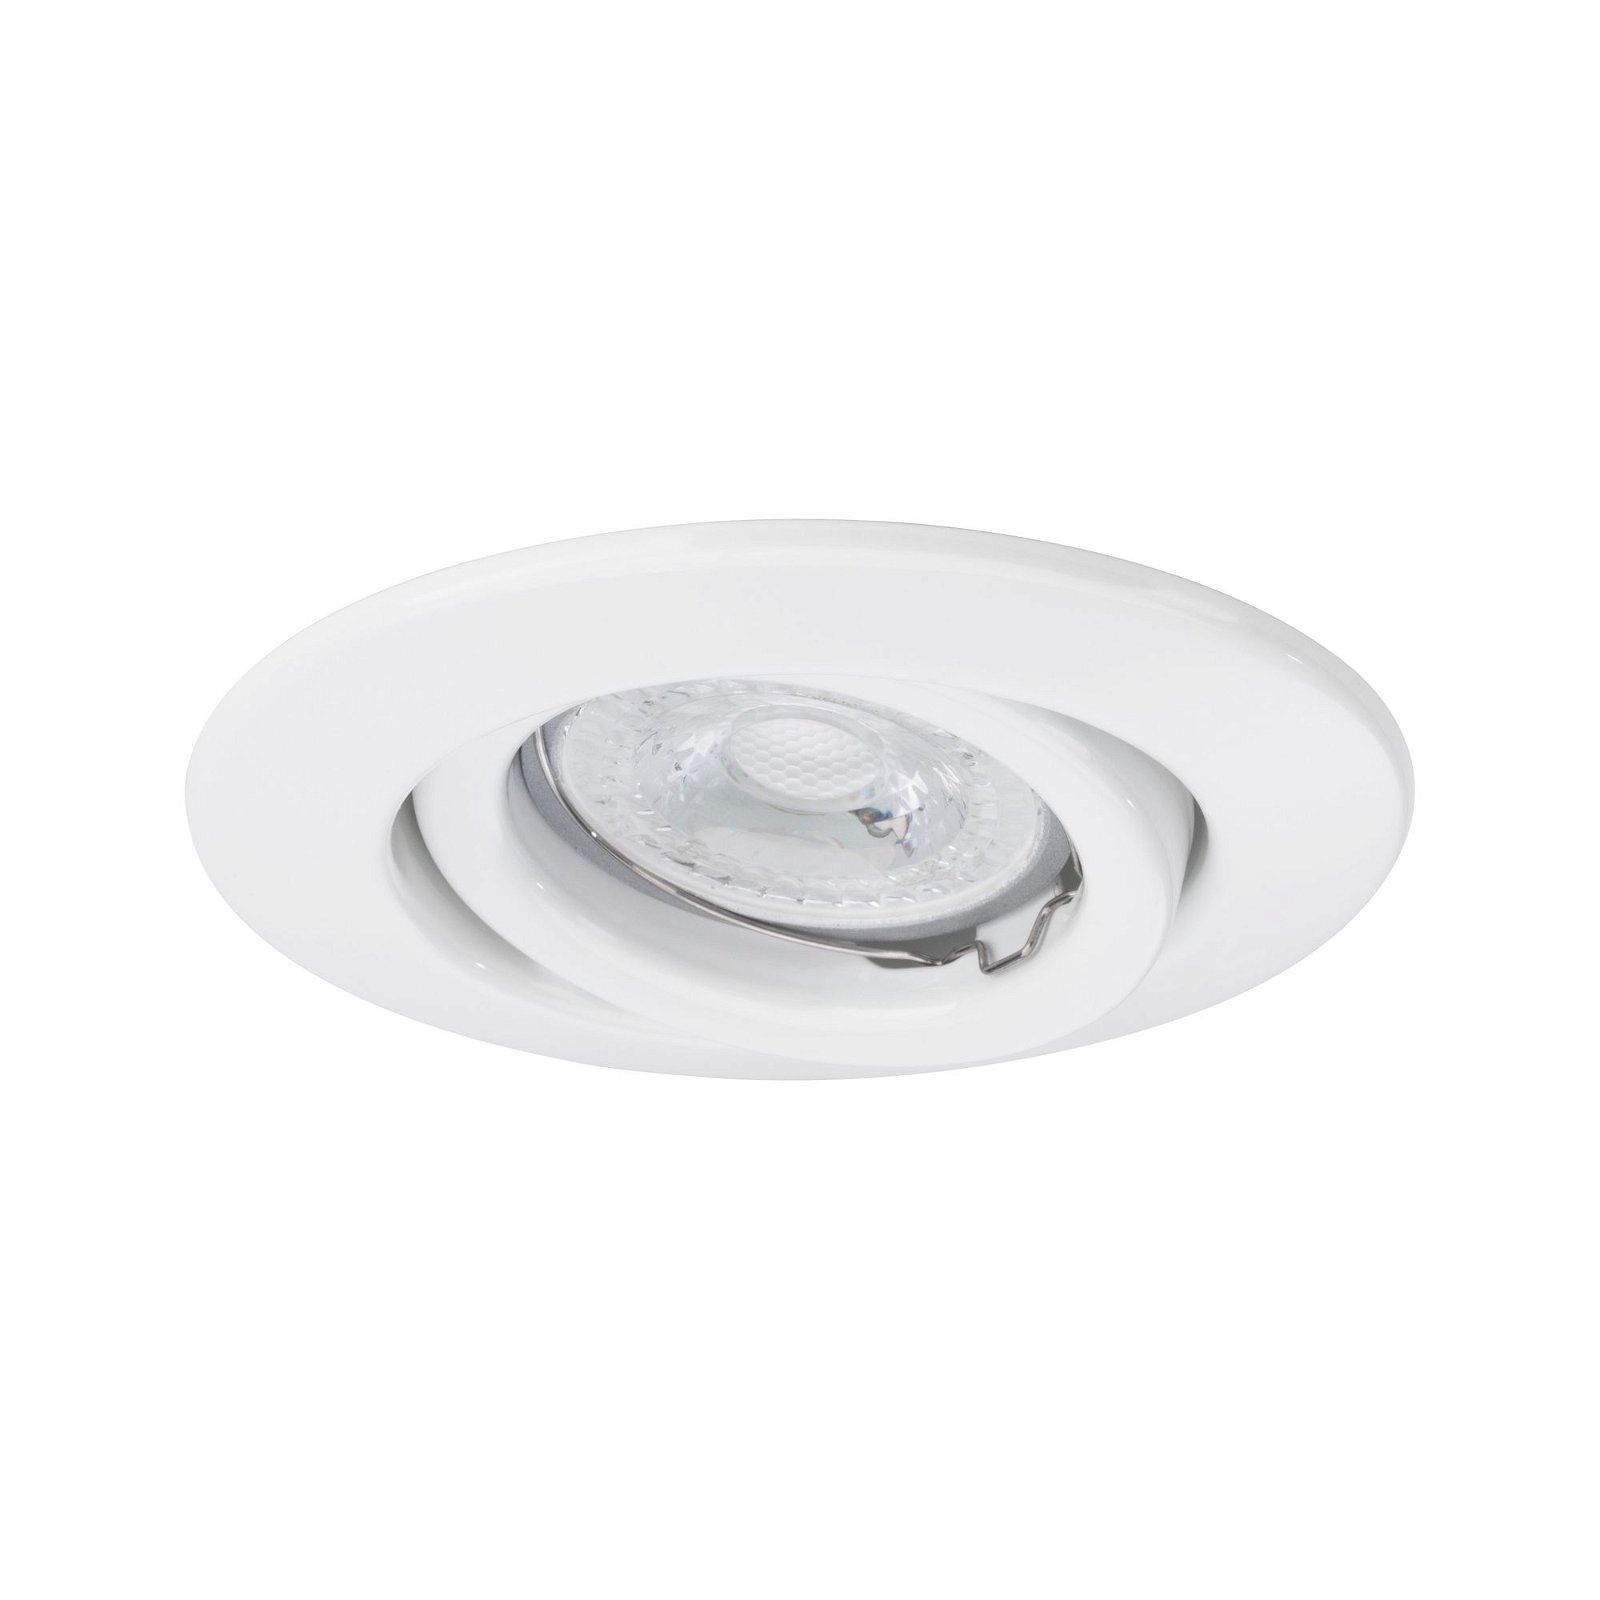 Recessed luminaire Quality Swivelling round 110mm 20° GU5,3 max. 50W 12V dimmable White